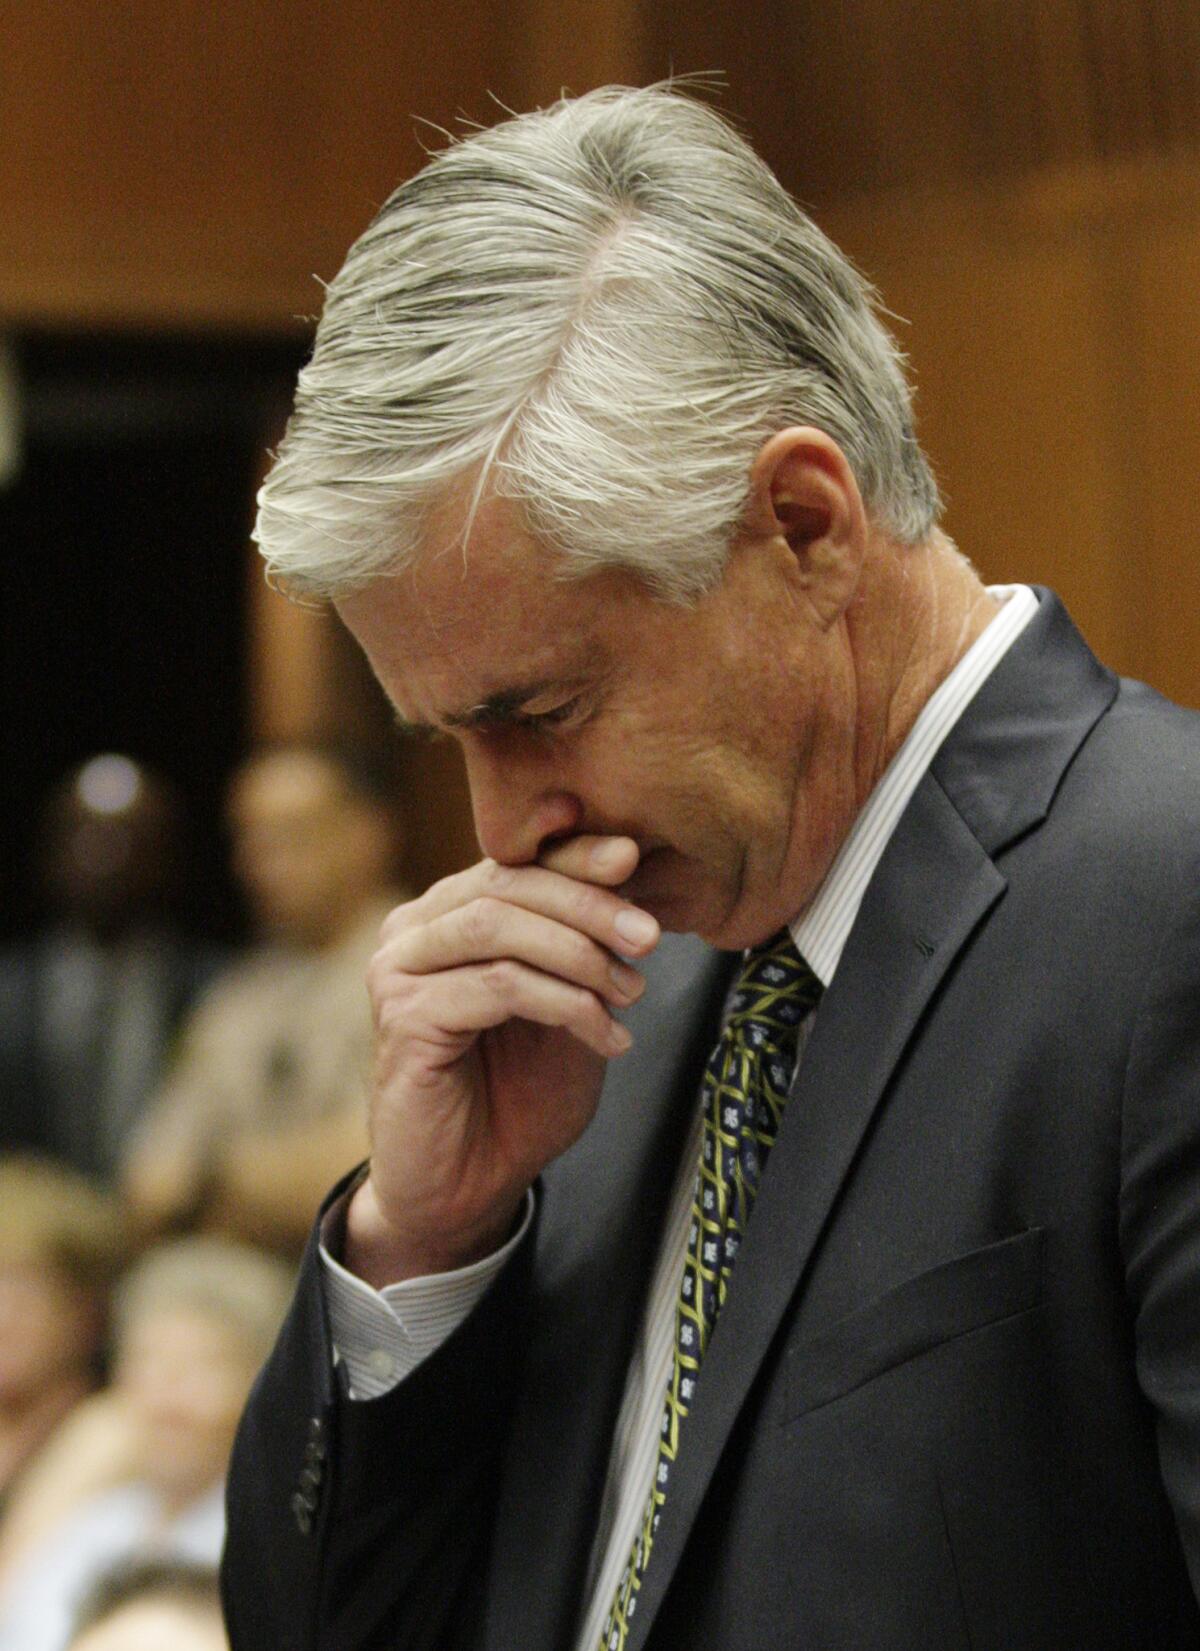 John Ruetten, the husband of murder victim Sherri Rasmussen and one-time love interest of Stephanie Lazarus, gives his victim impact statement during the sentencing of the former LAPD detective in Los Angeles Superior Court on May 11, 2012.